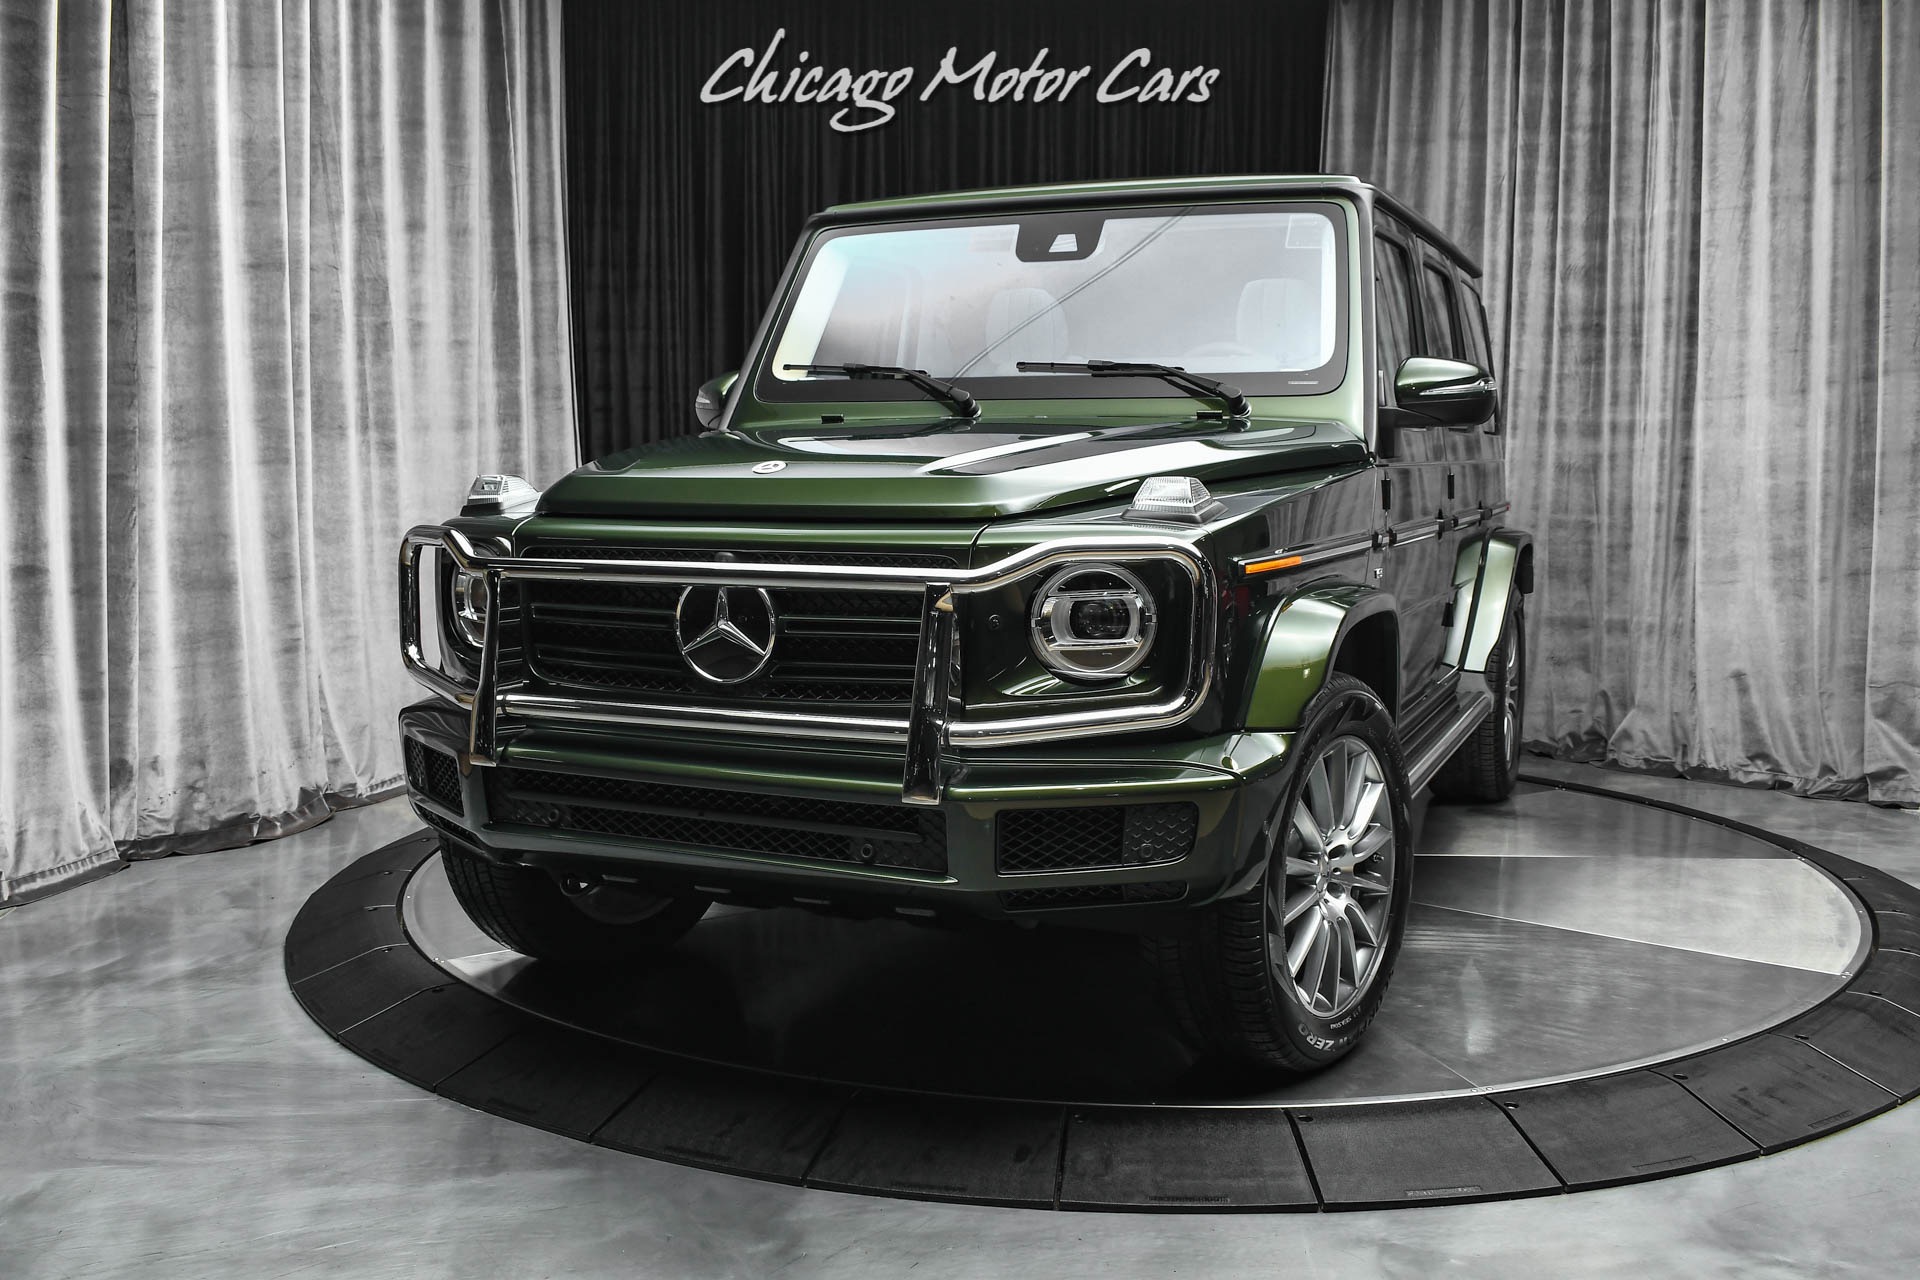 Used-2021-Mercedes-Benz-G550-4MATIC-RARE-Olive-Metallic-Paint-Exclusive-Interior-Package-PLUS